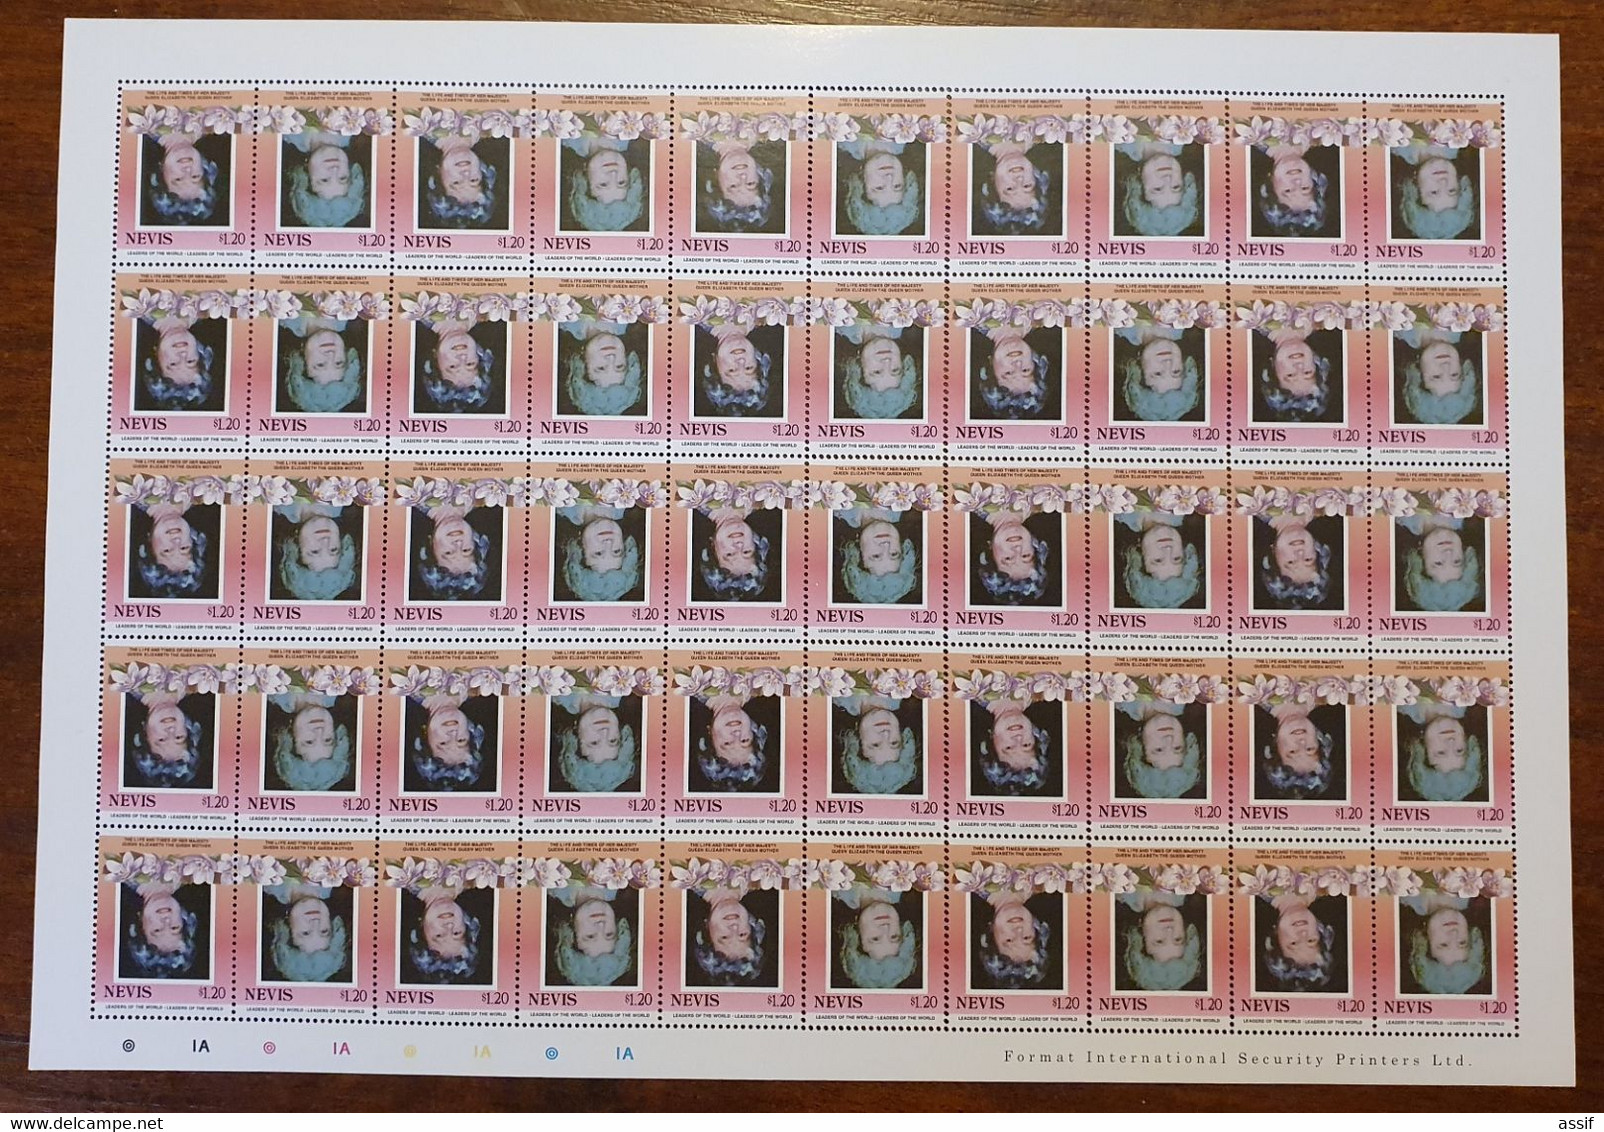 NEVIS 1,20$ 1985 FEUILLE ENTIERE CENTRE RENVERSE SHEET INVERTED YT 315 Et 316 50 TIMBRES NEUFS ** /FREE SHIPPING R - St.Kitts Y Nevis ( 1983-...)